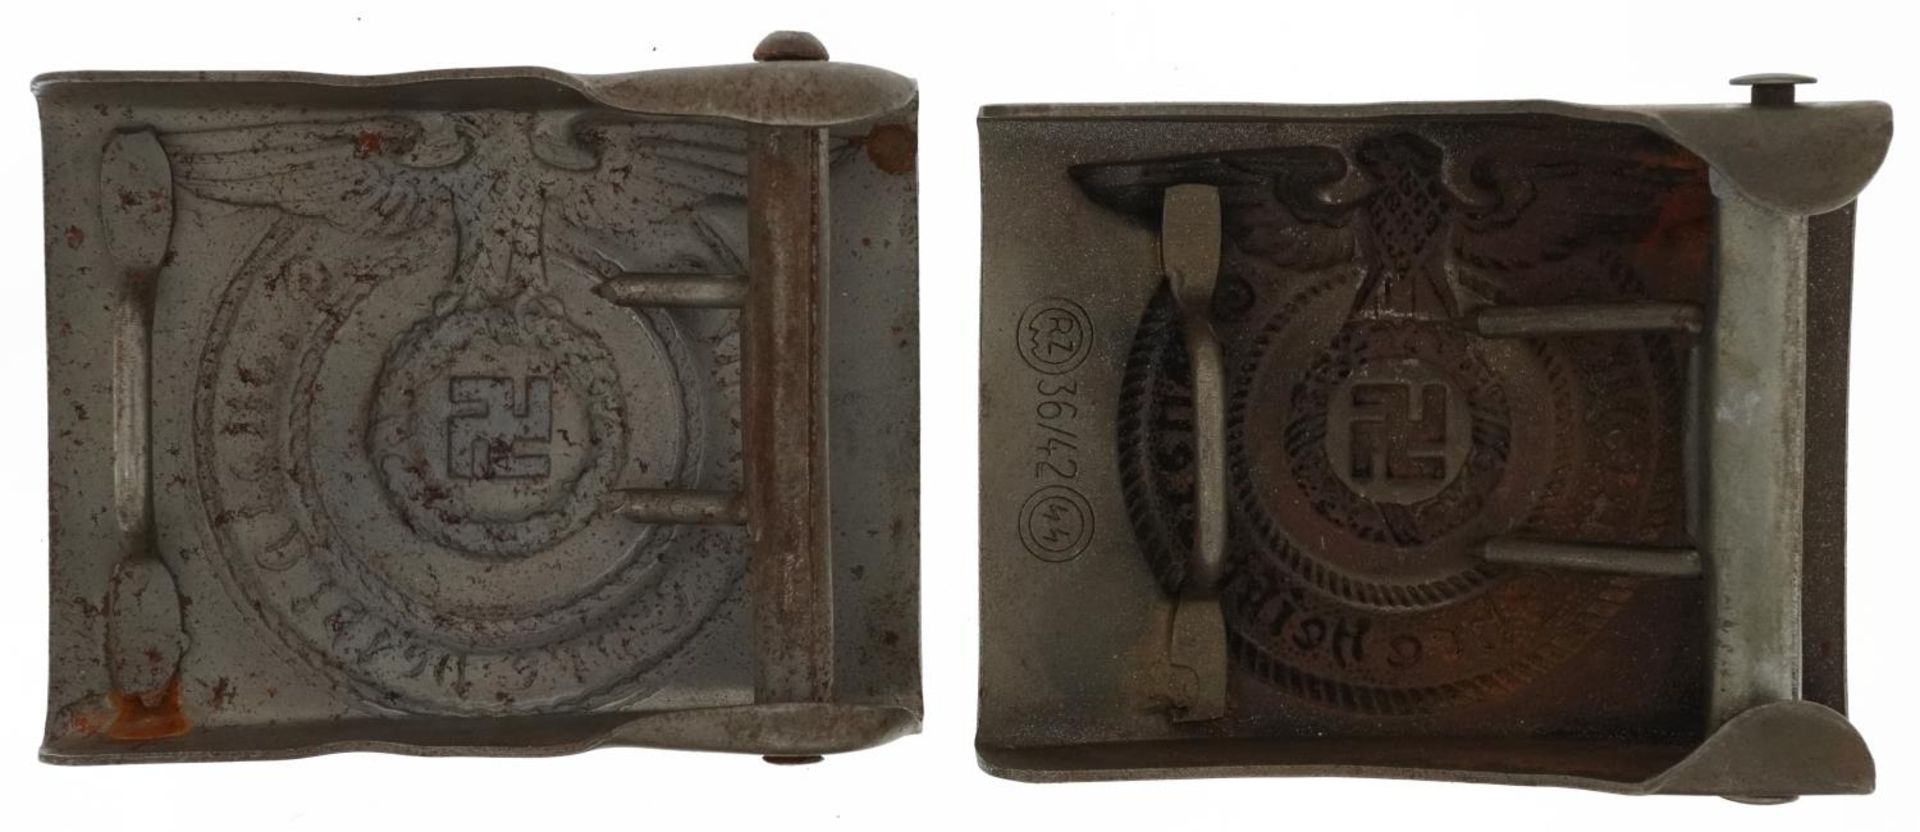 Four German military interest buckles including SS : For further information on this lot please - Image 3 of 3